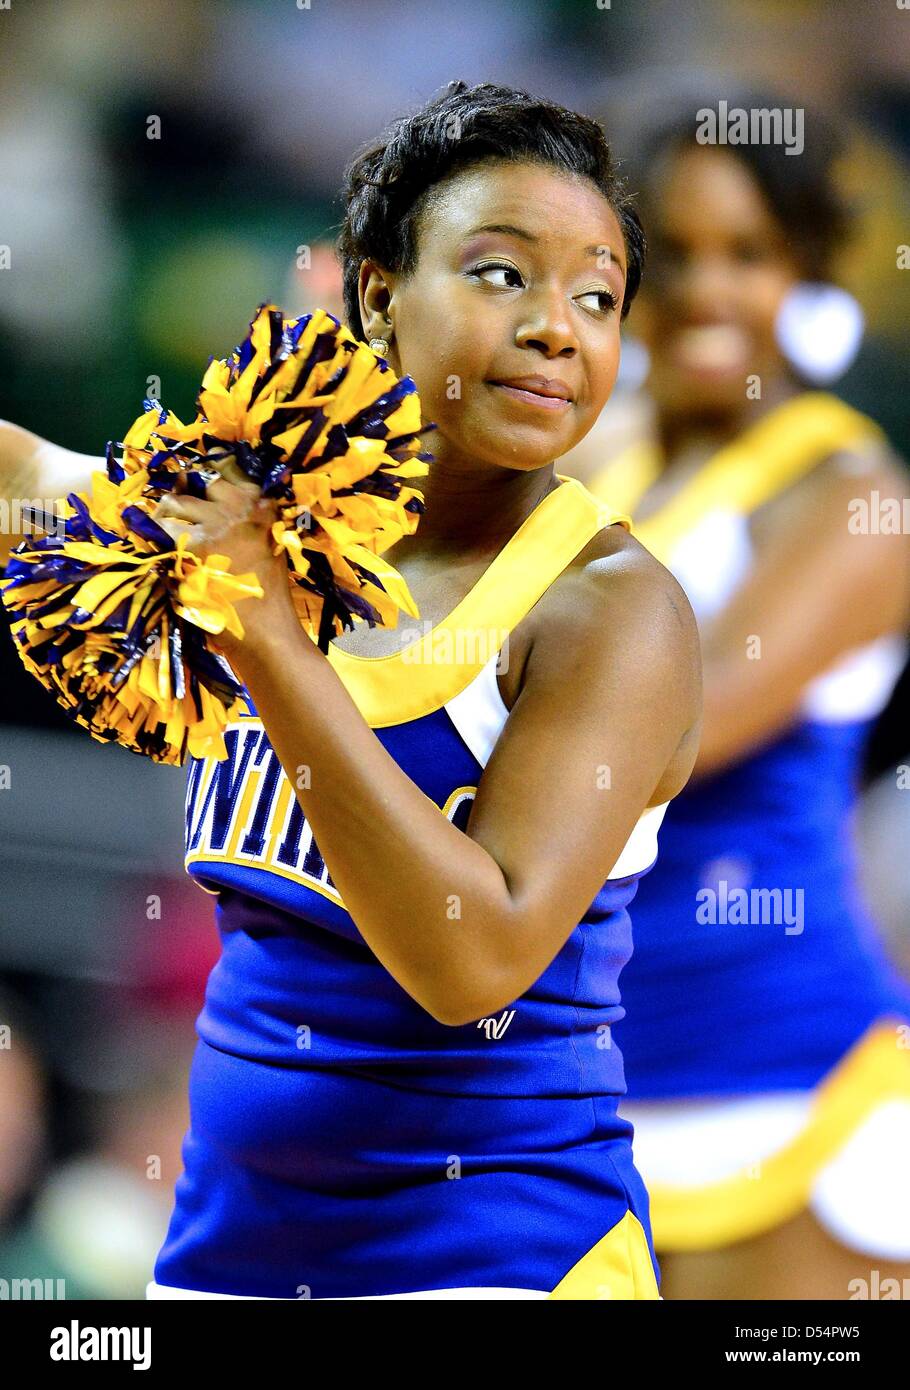 March 24, 2013 - Waco, TX, U.S - March 24, 2013..Prairie View cheerleader during first round of NCAA Women's Basketball regional tournament at Ferrell Center in Waco, TX. Baylor defeat Prairie A&M 82-40 to advance to the second round. Stock Photo